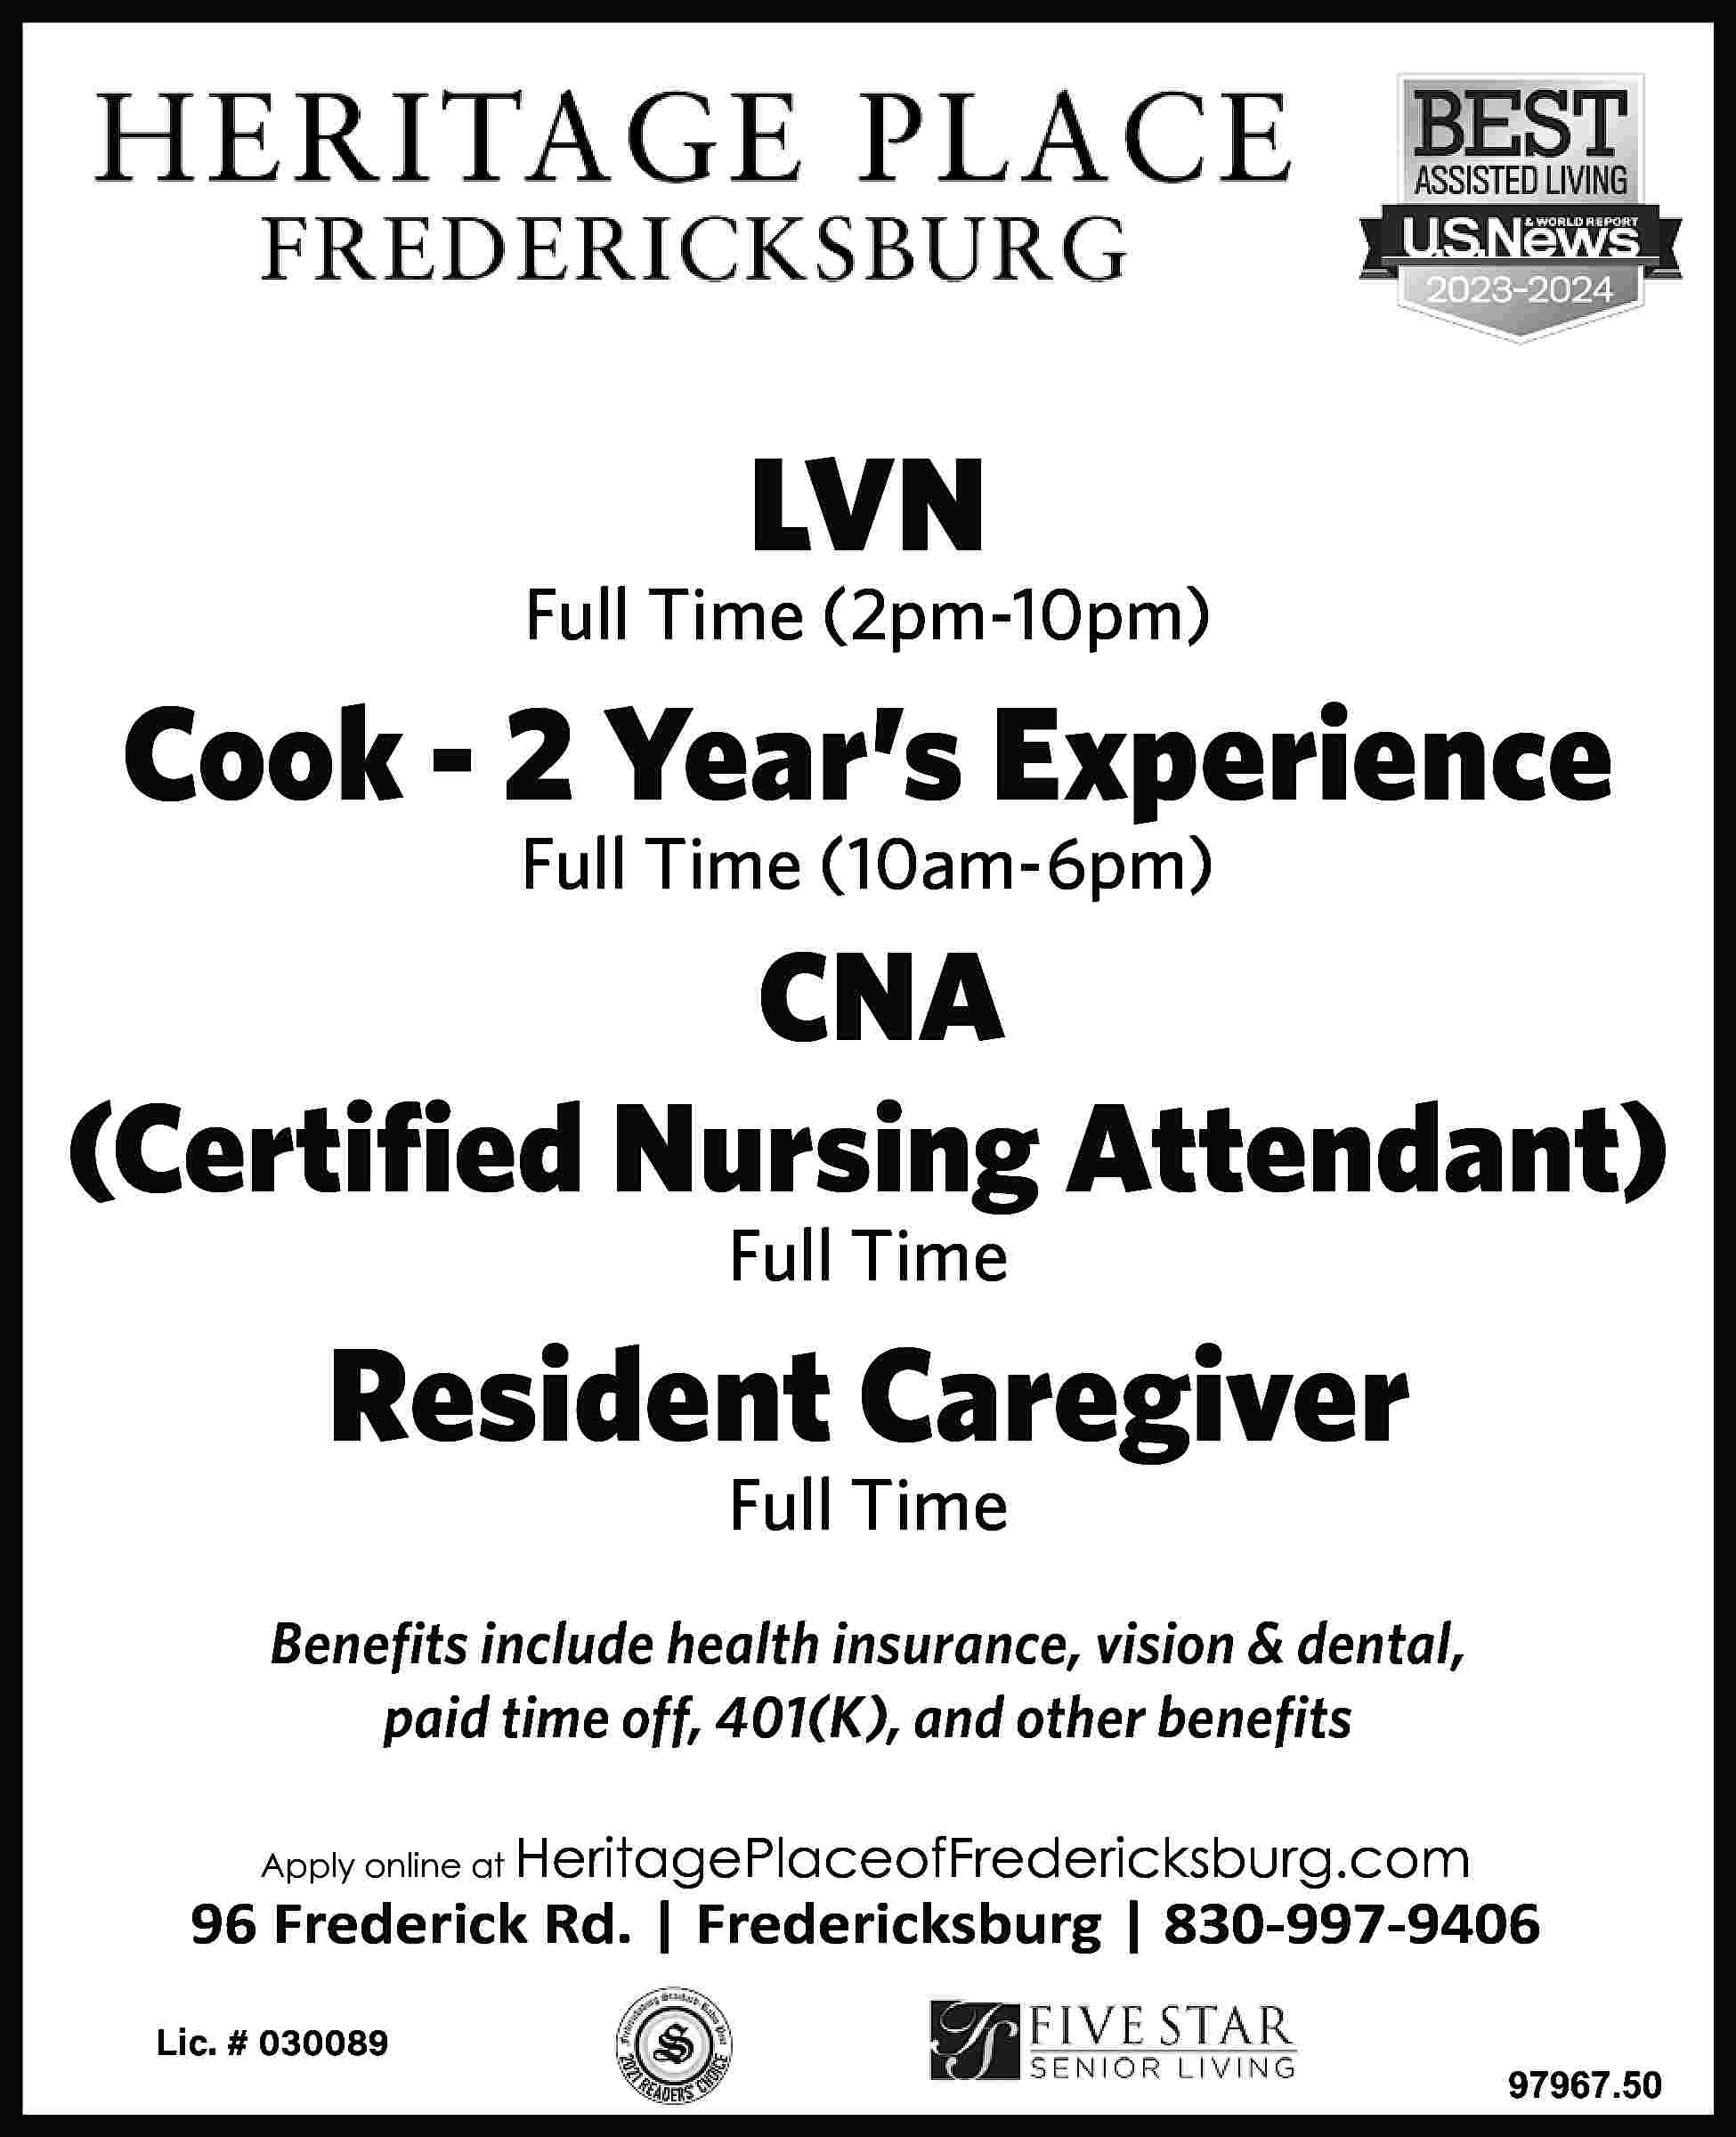 LVN Full Time (2pm-10pm) Cook  LVN Full Time (2pm-10pm) Cook - 2 Year’s Experience Full Time (10am-6pm) CNA (Certified Nursing Attendant) Full Time Resident Caregiver Full Time Benefits include health insurance, vision & dental, paid time off, 401(K), and other benefits Aplyonieat Lic. # 030089 HeritagPlcofFdksbu.com 97967.50